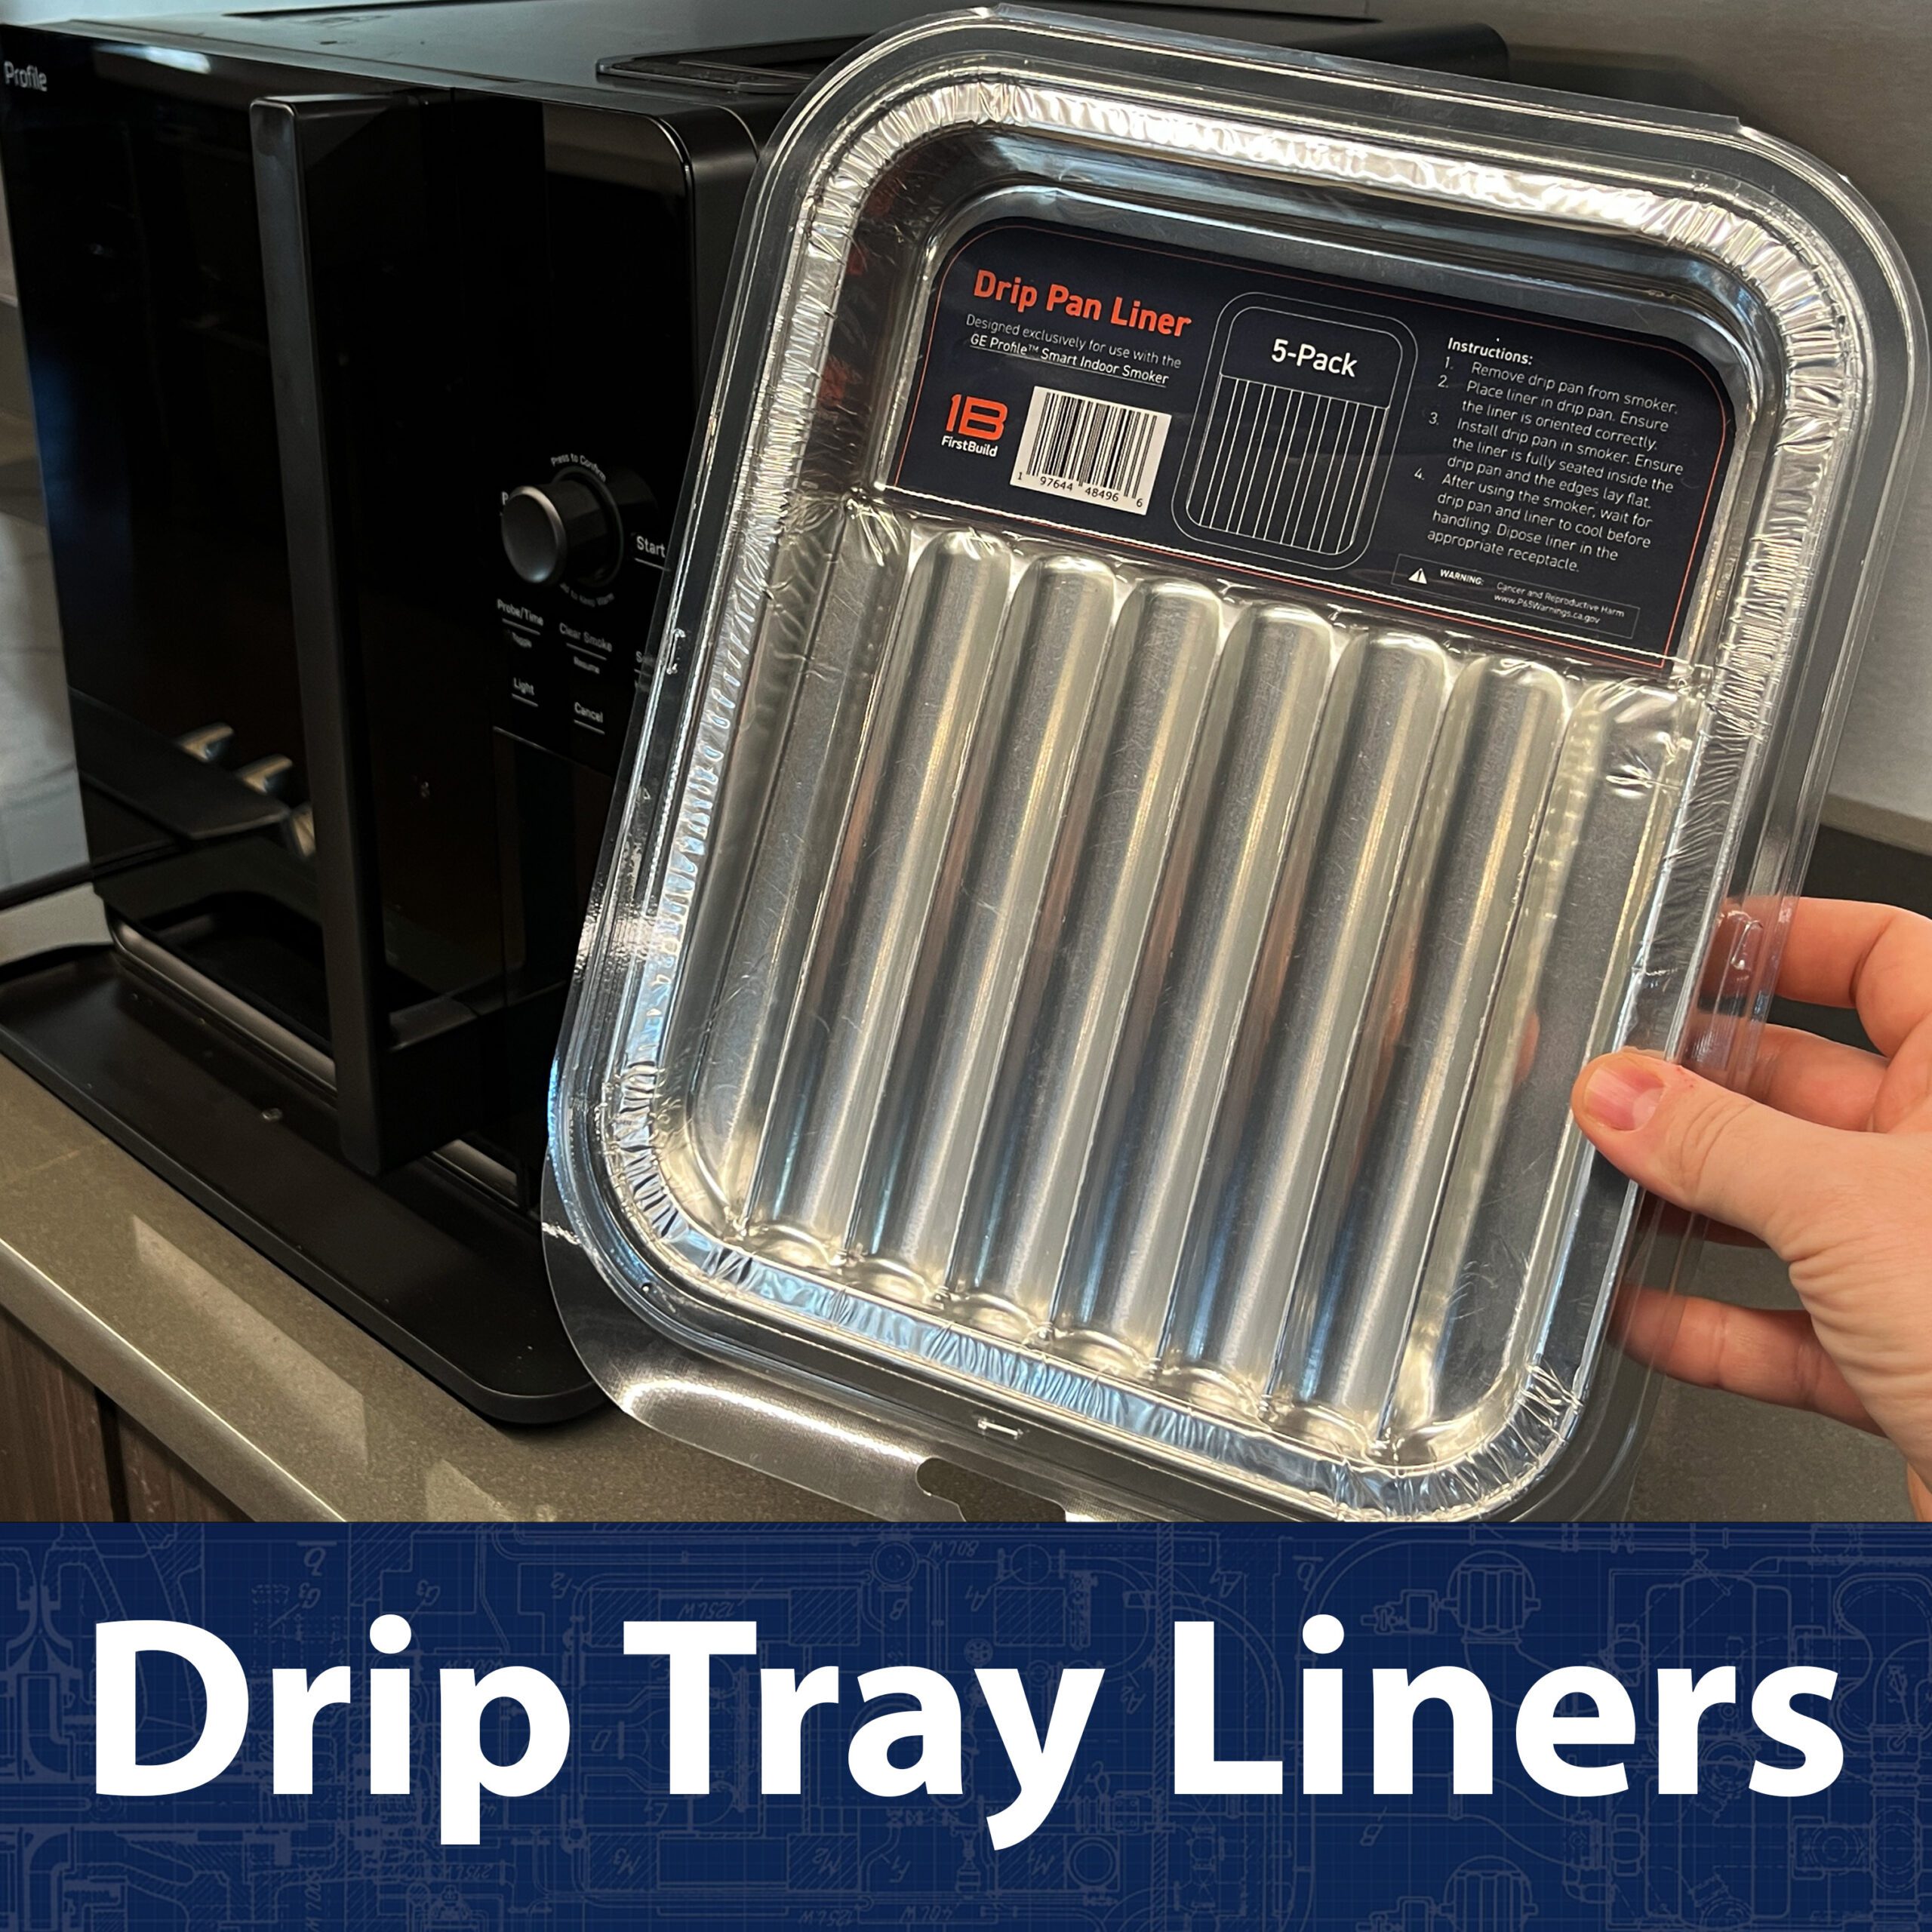 Indoor Smoker Drip Tray Liners (5-pack) - FirstBuild